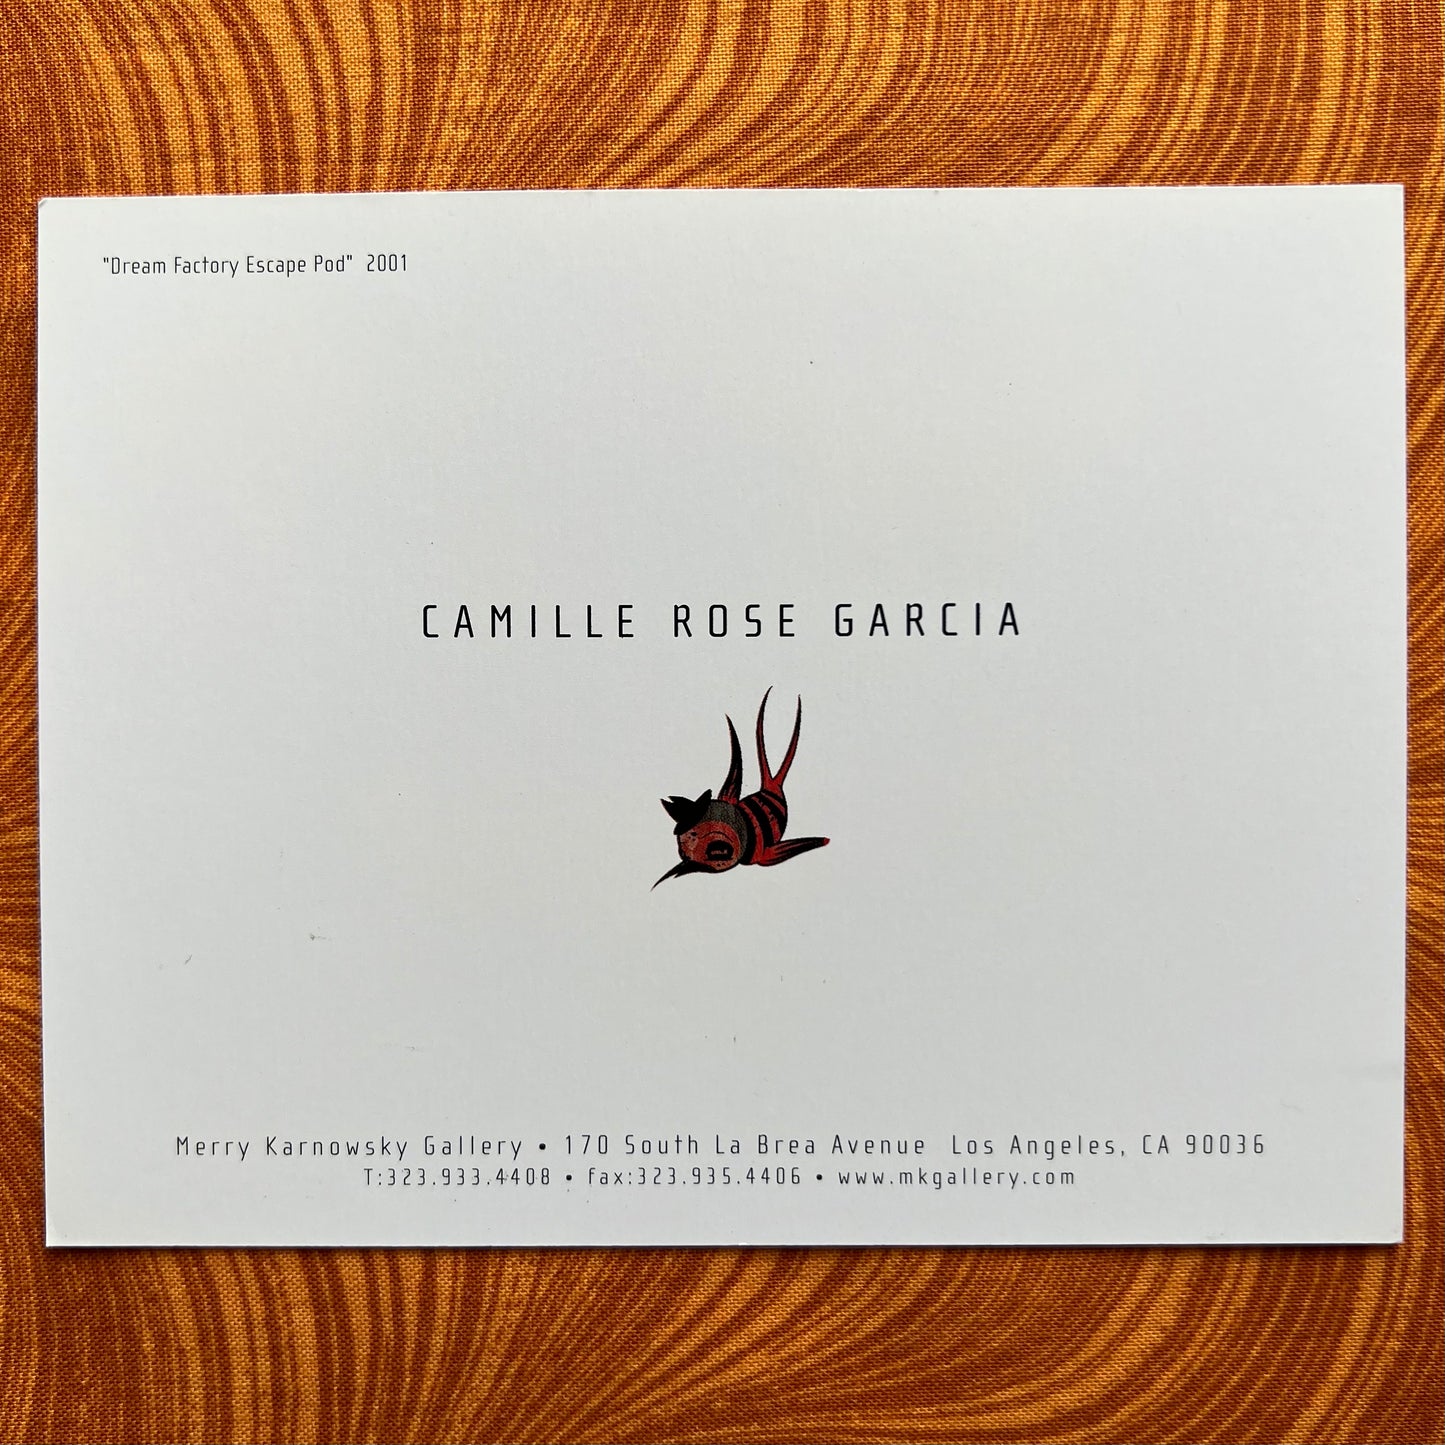 Camille Rose Garcia- The Print and Postcard Set- Signed Limited Edition #539/2000